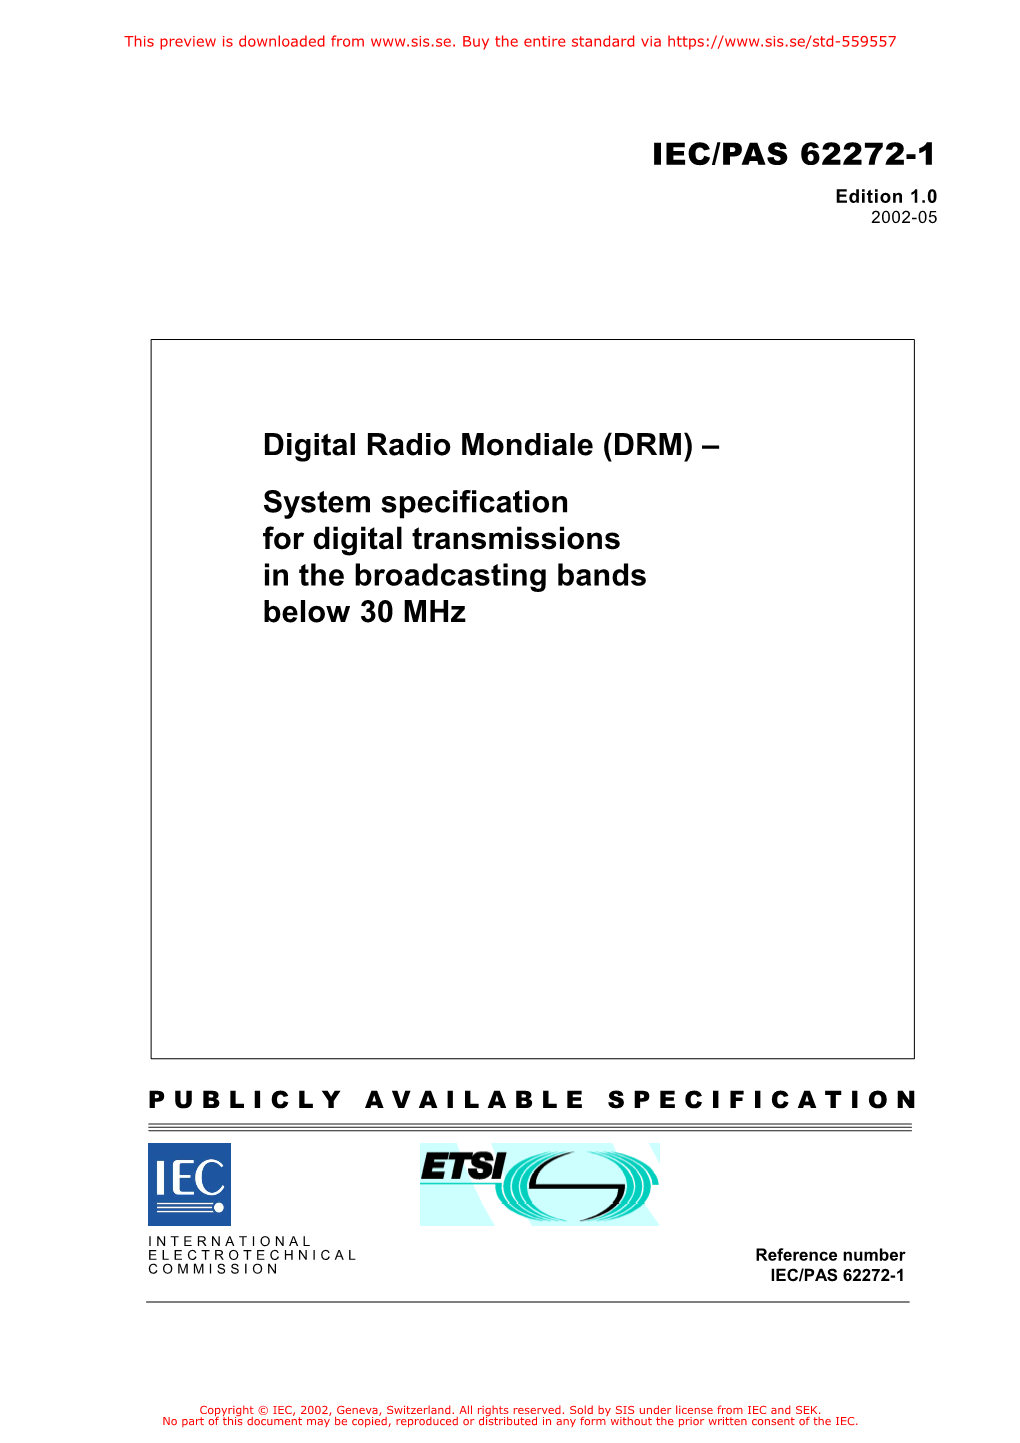 Digital Radio Mondiale (DRM) – System Specification for Digital Transmissions in the Broadcasting Bands Below 30 Mhz